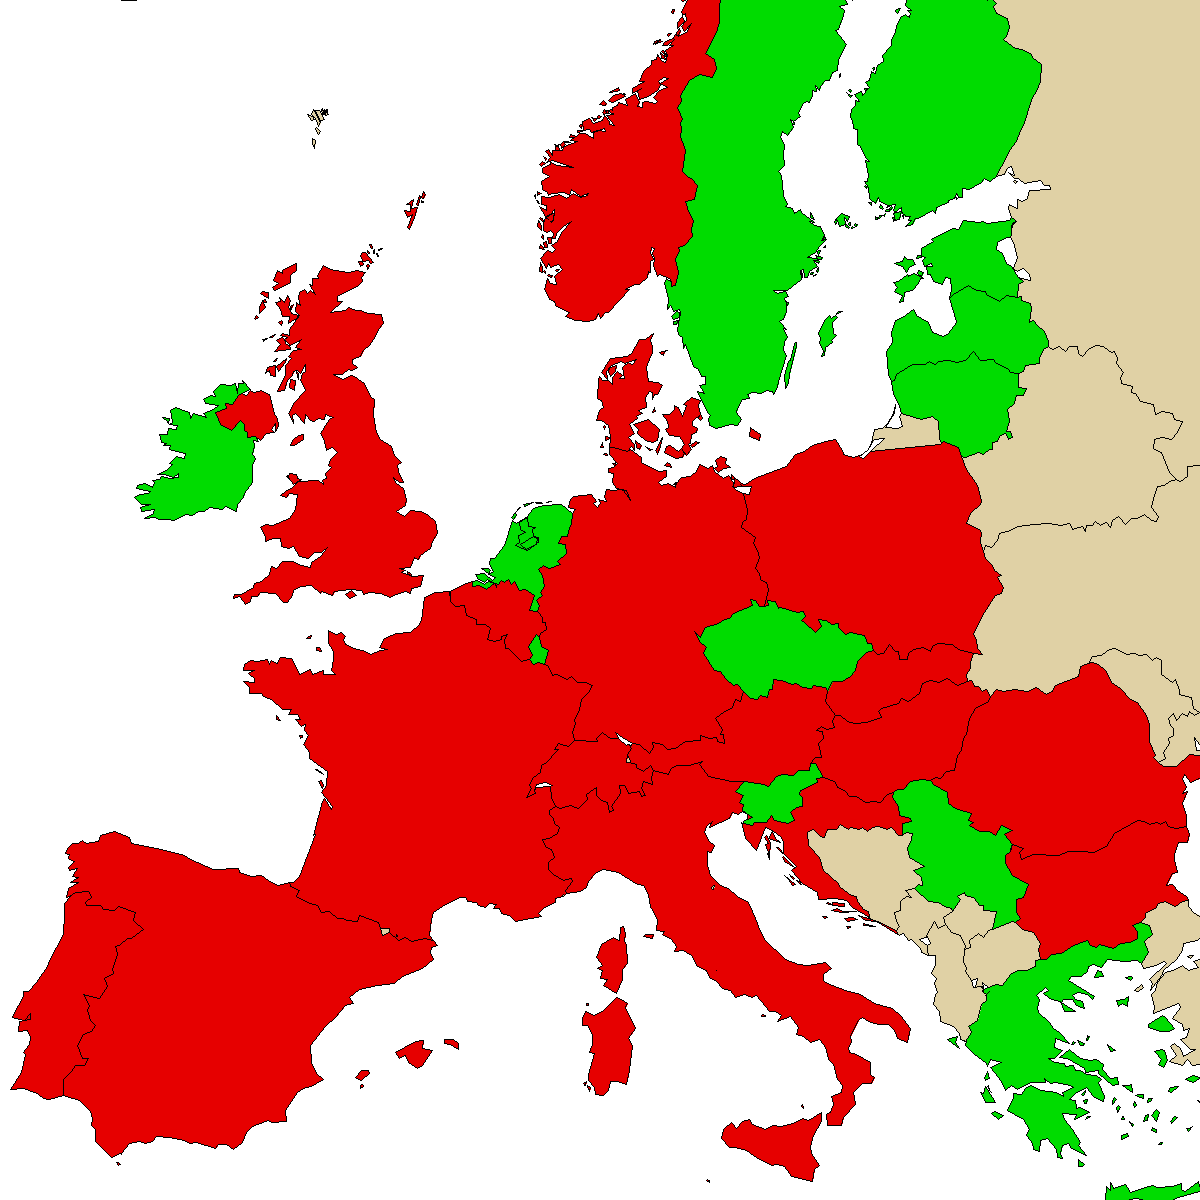 legal info map for our product Euthylone, green are countries where we found no ban, red with ban, grey is unknown